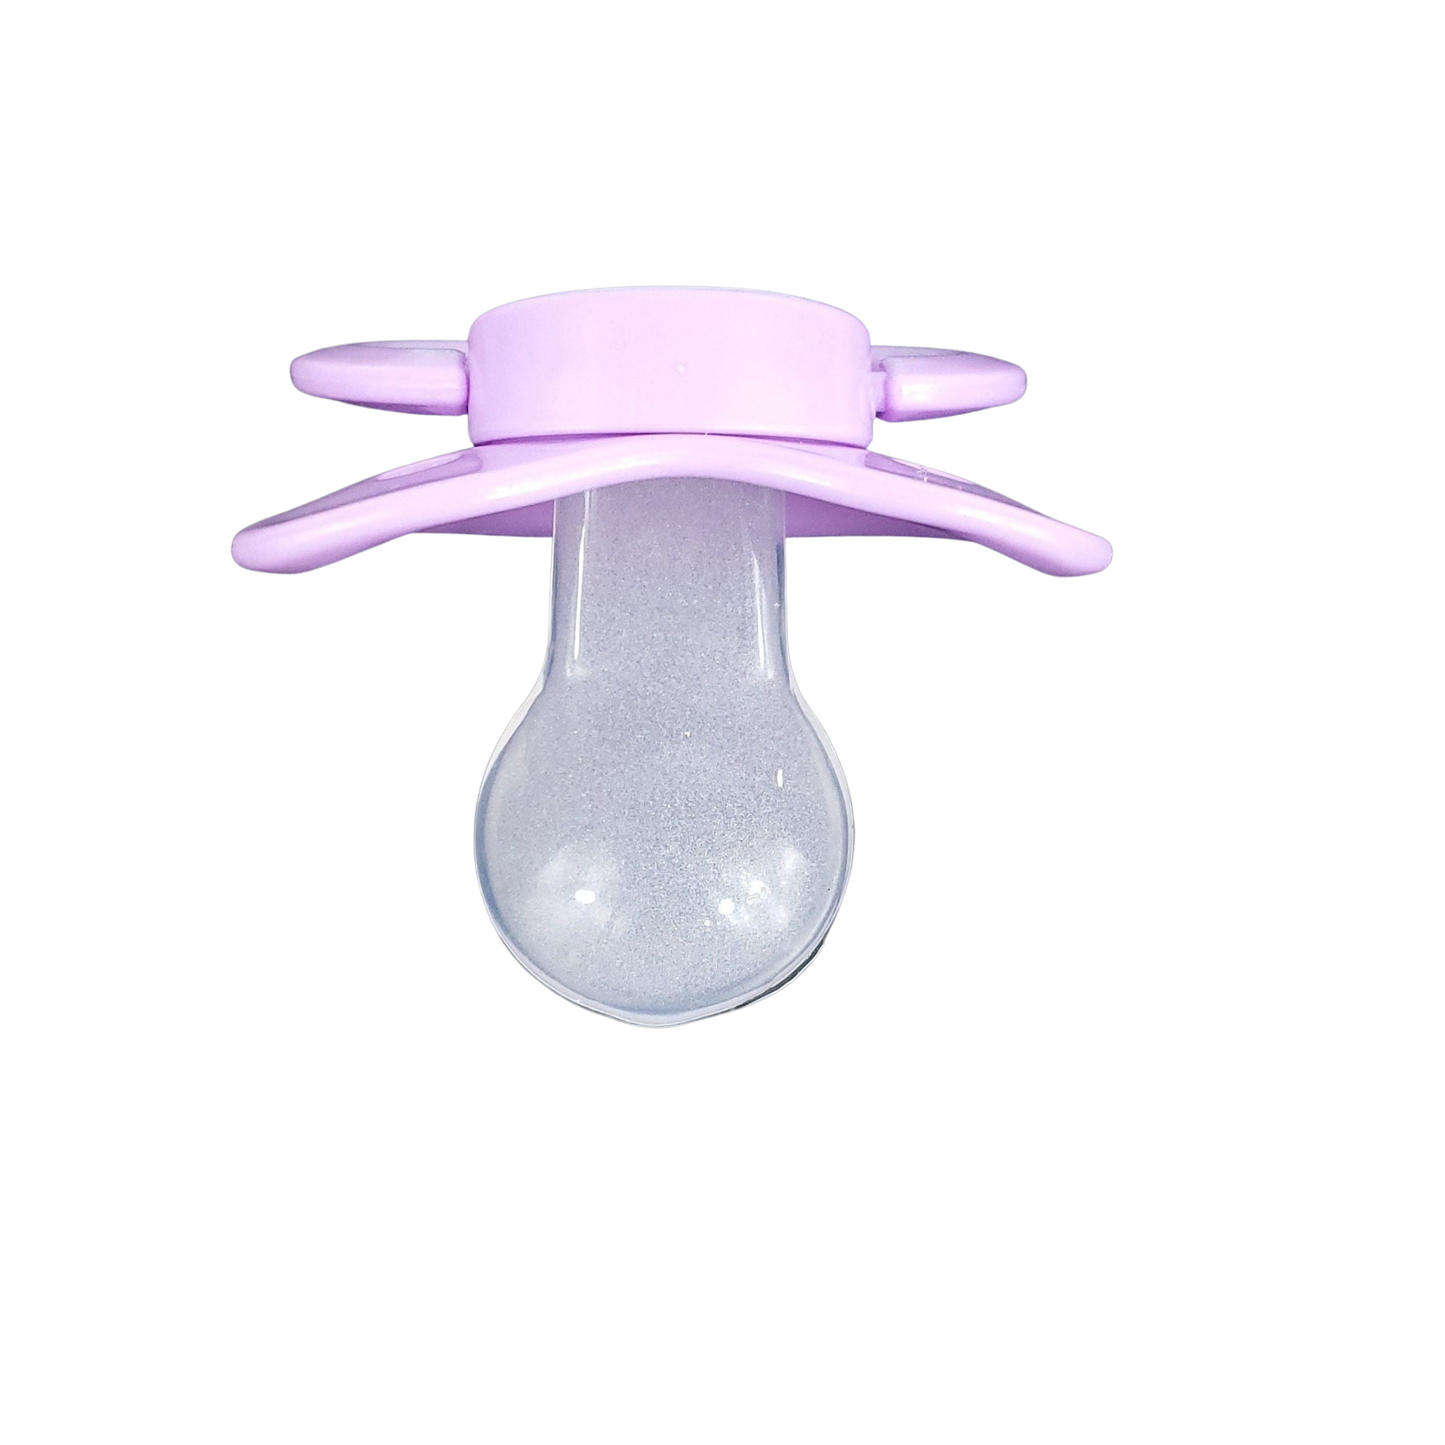 Puppy Adult Pacifier